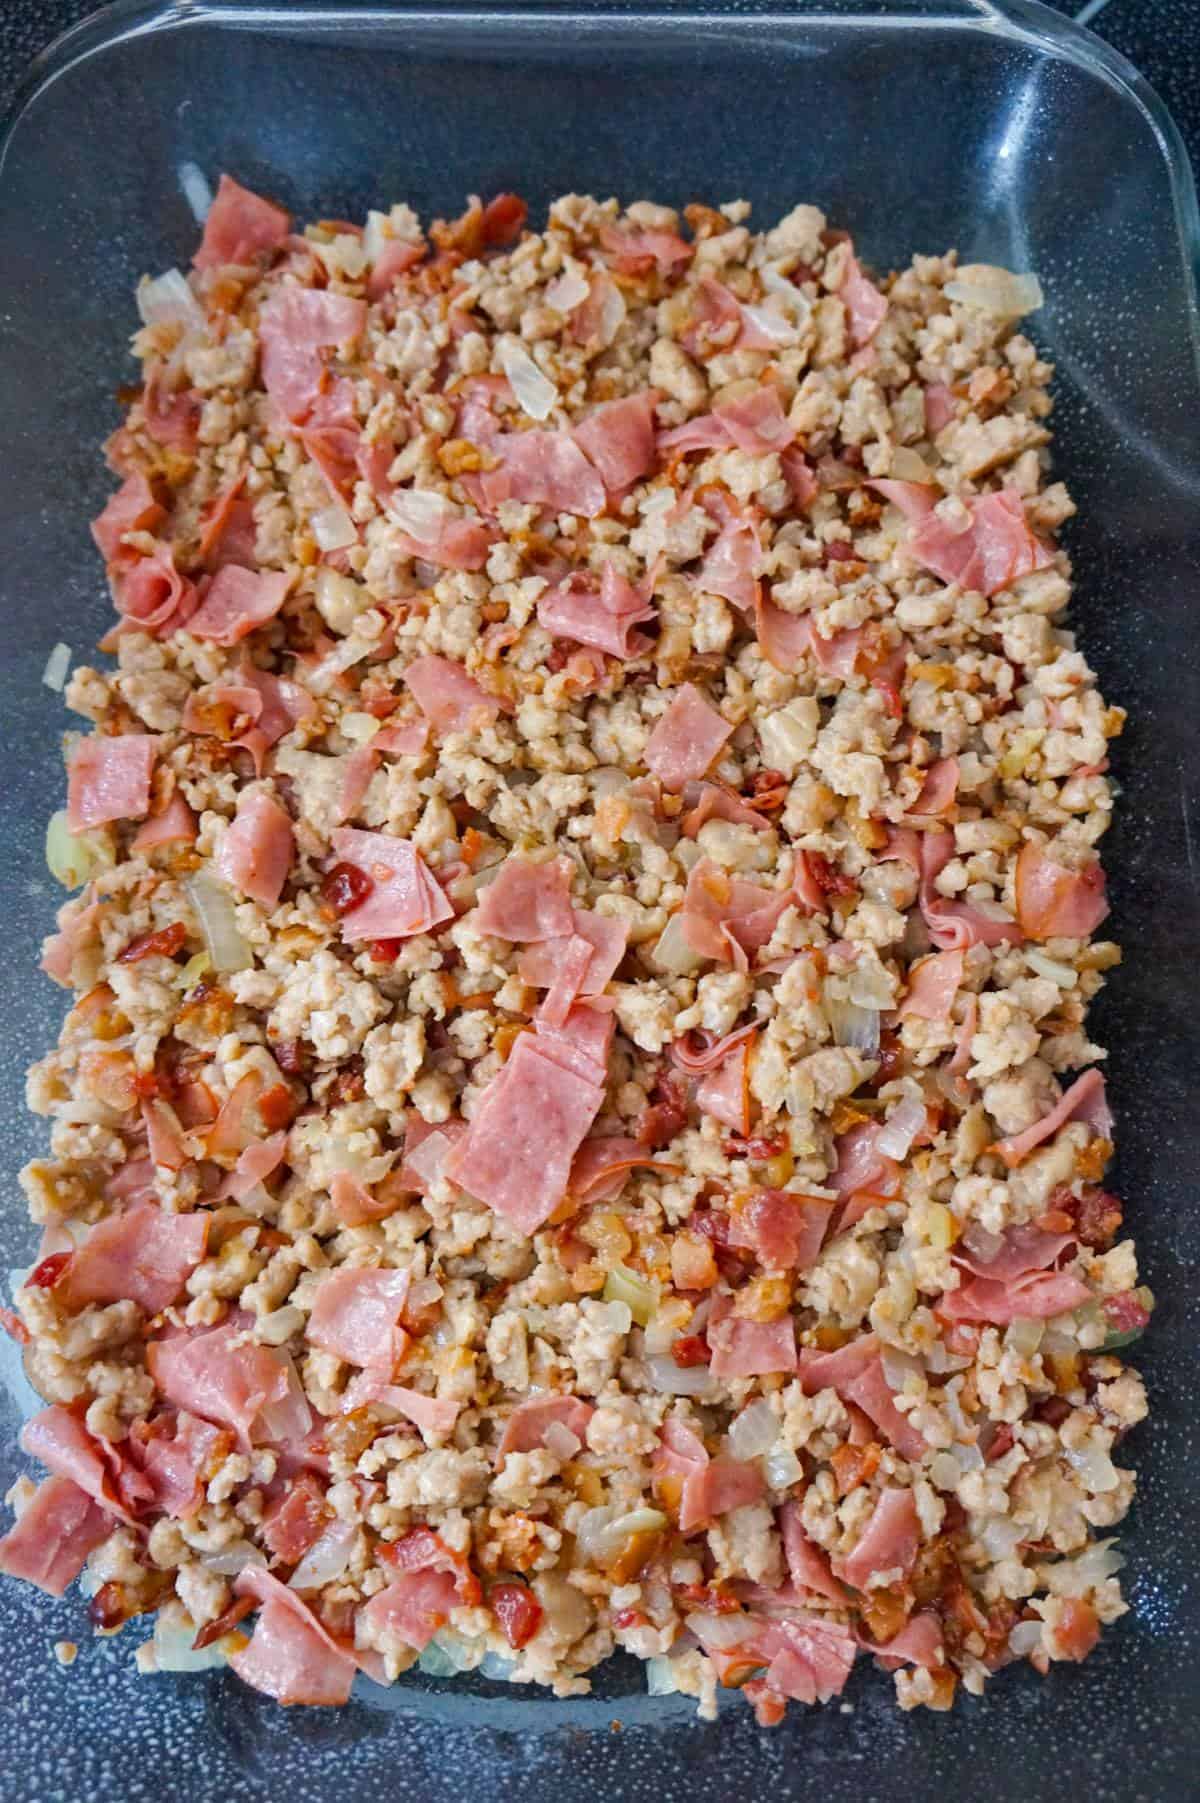 meat mixture in a baking dish